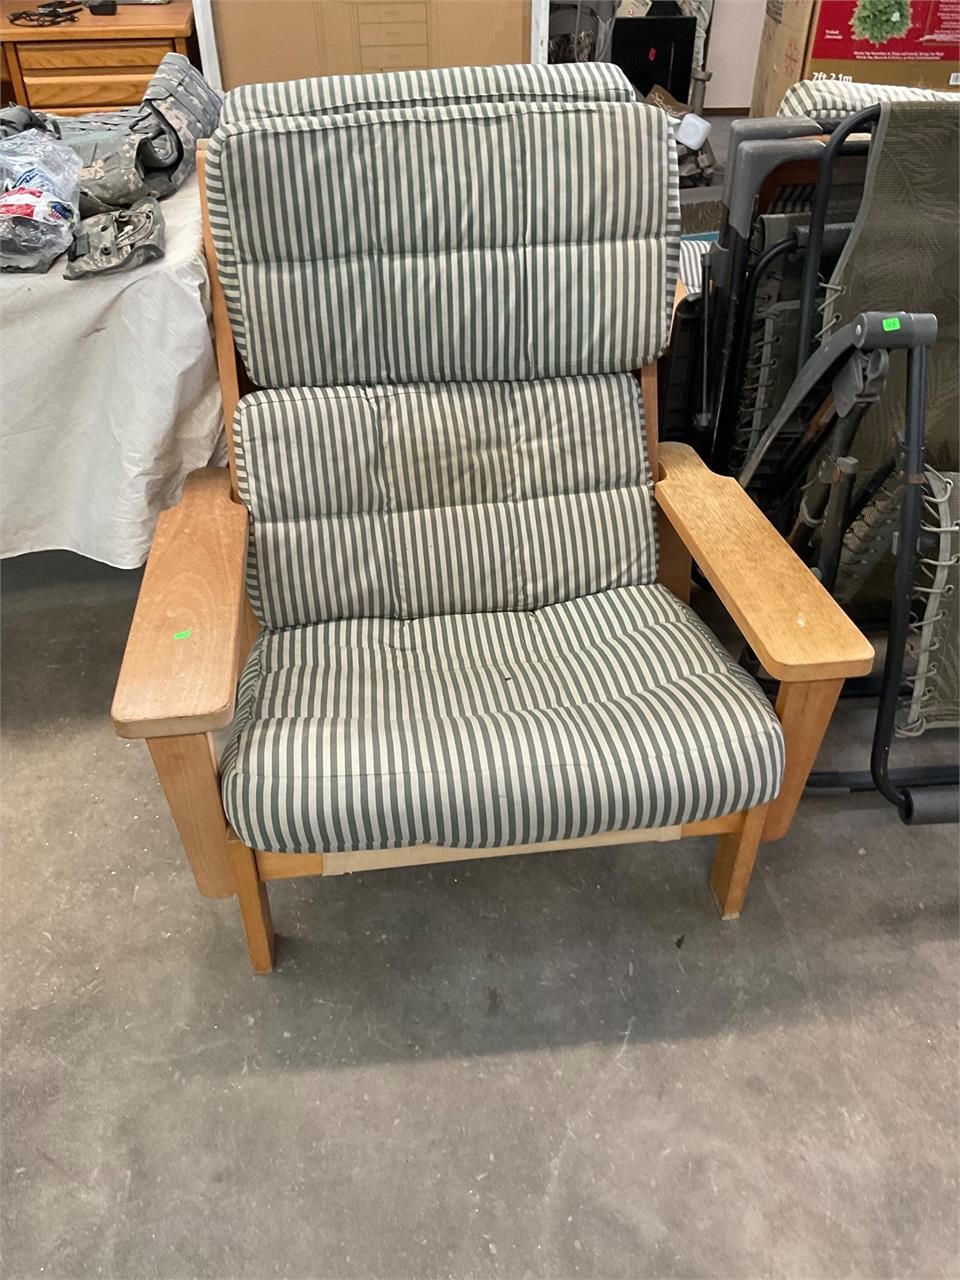 2 Wooden Porch Chairs